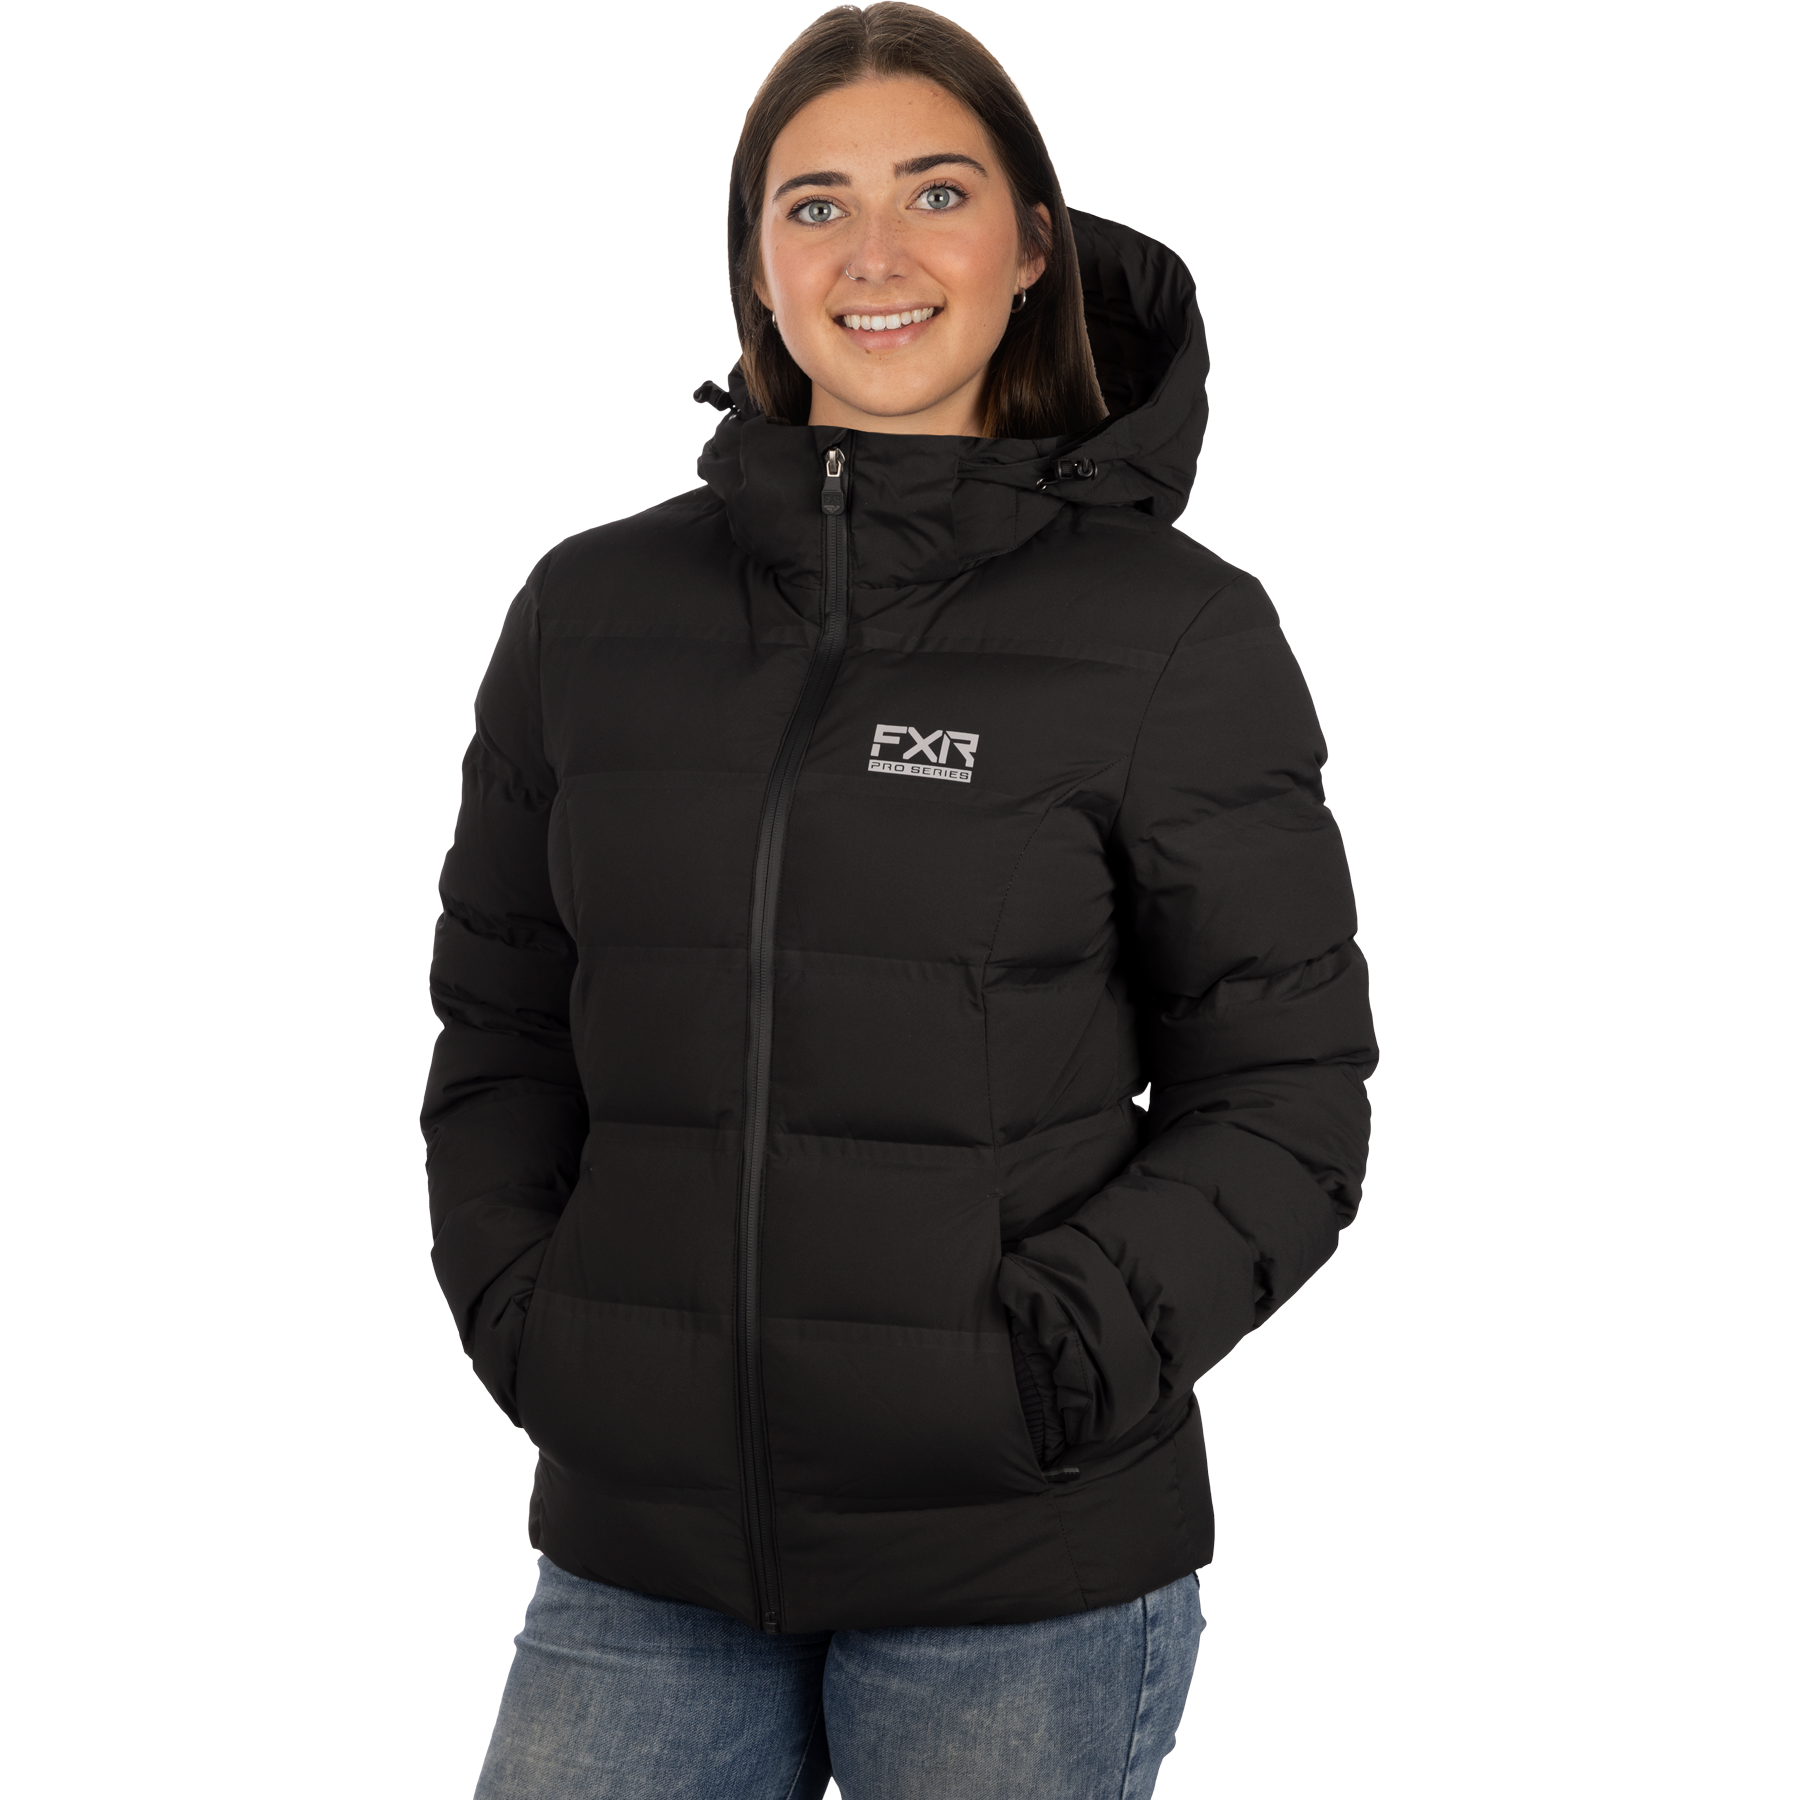 fxr racing jackets for womens elevation pro down